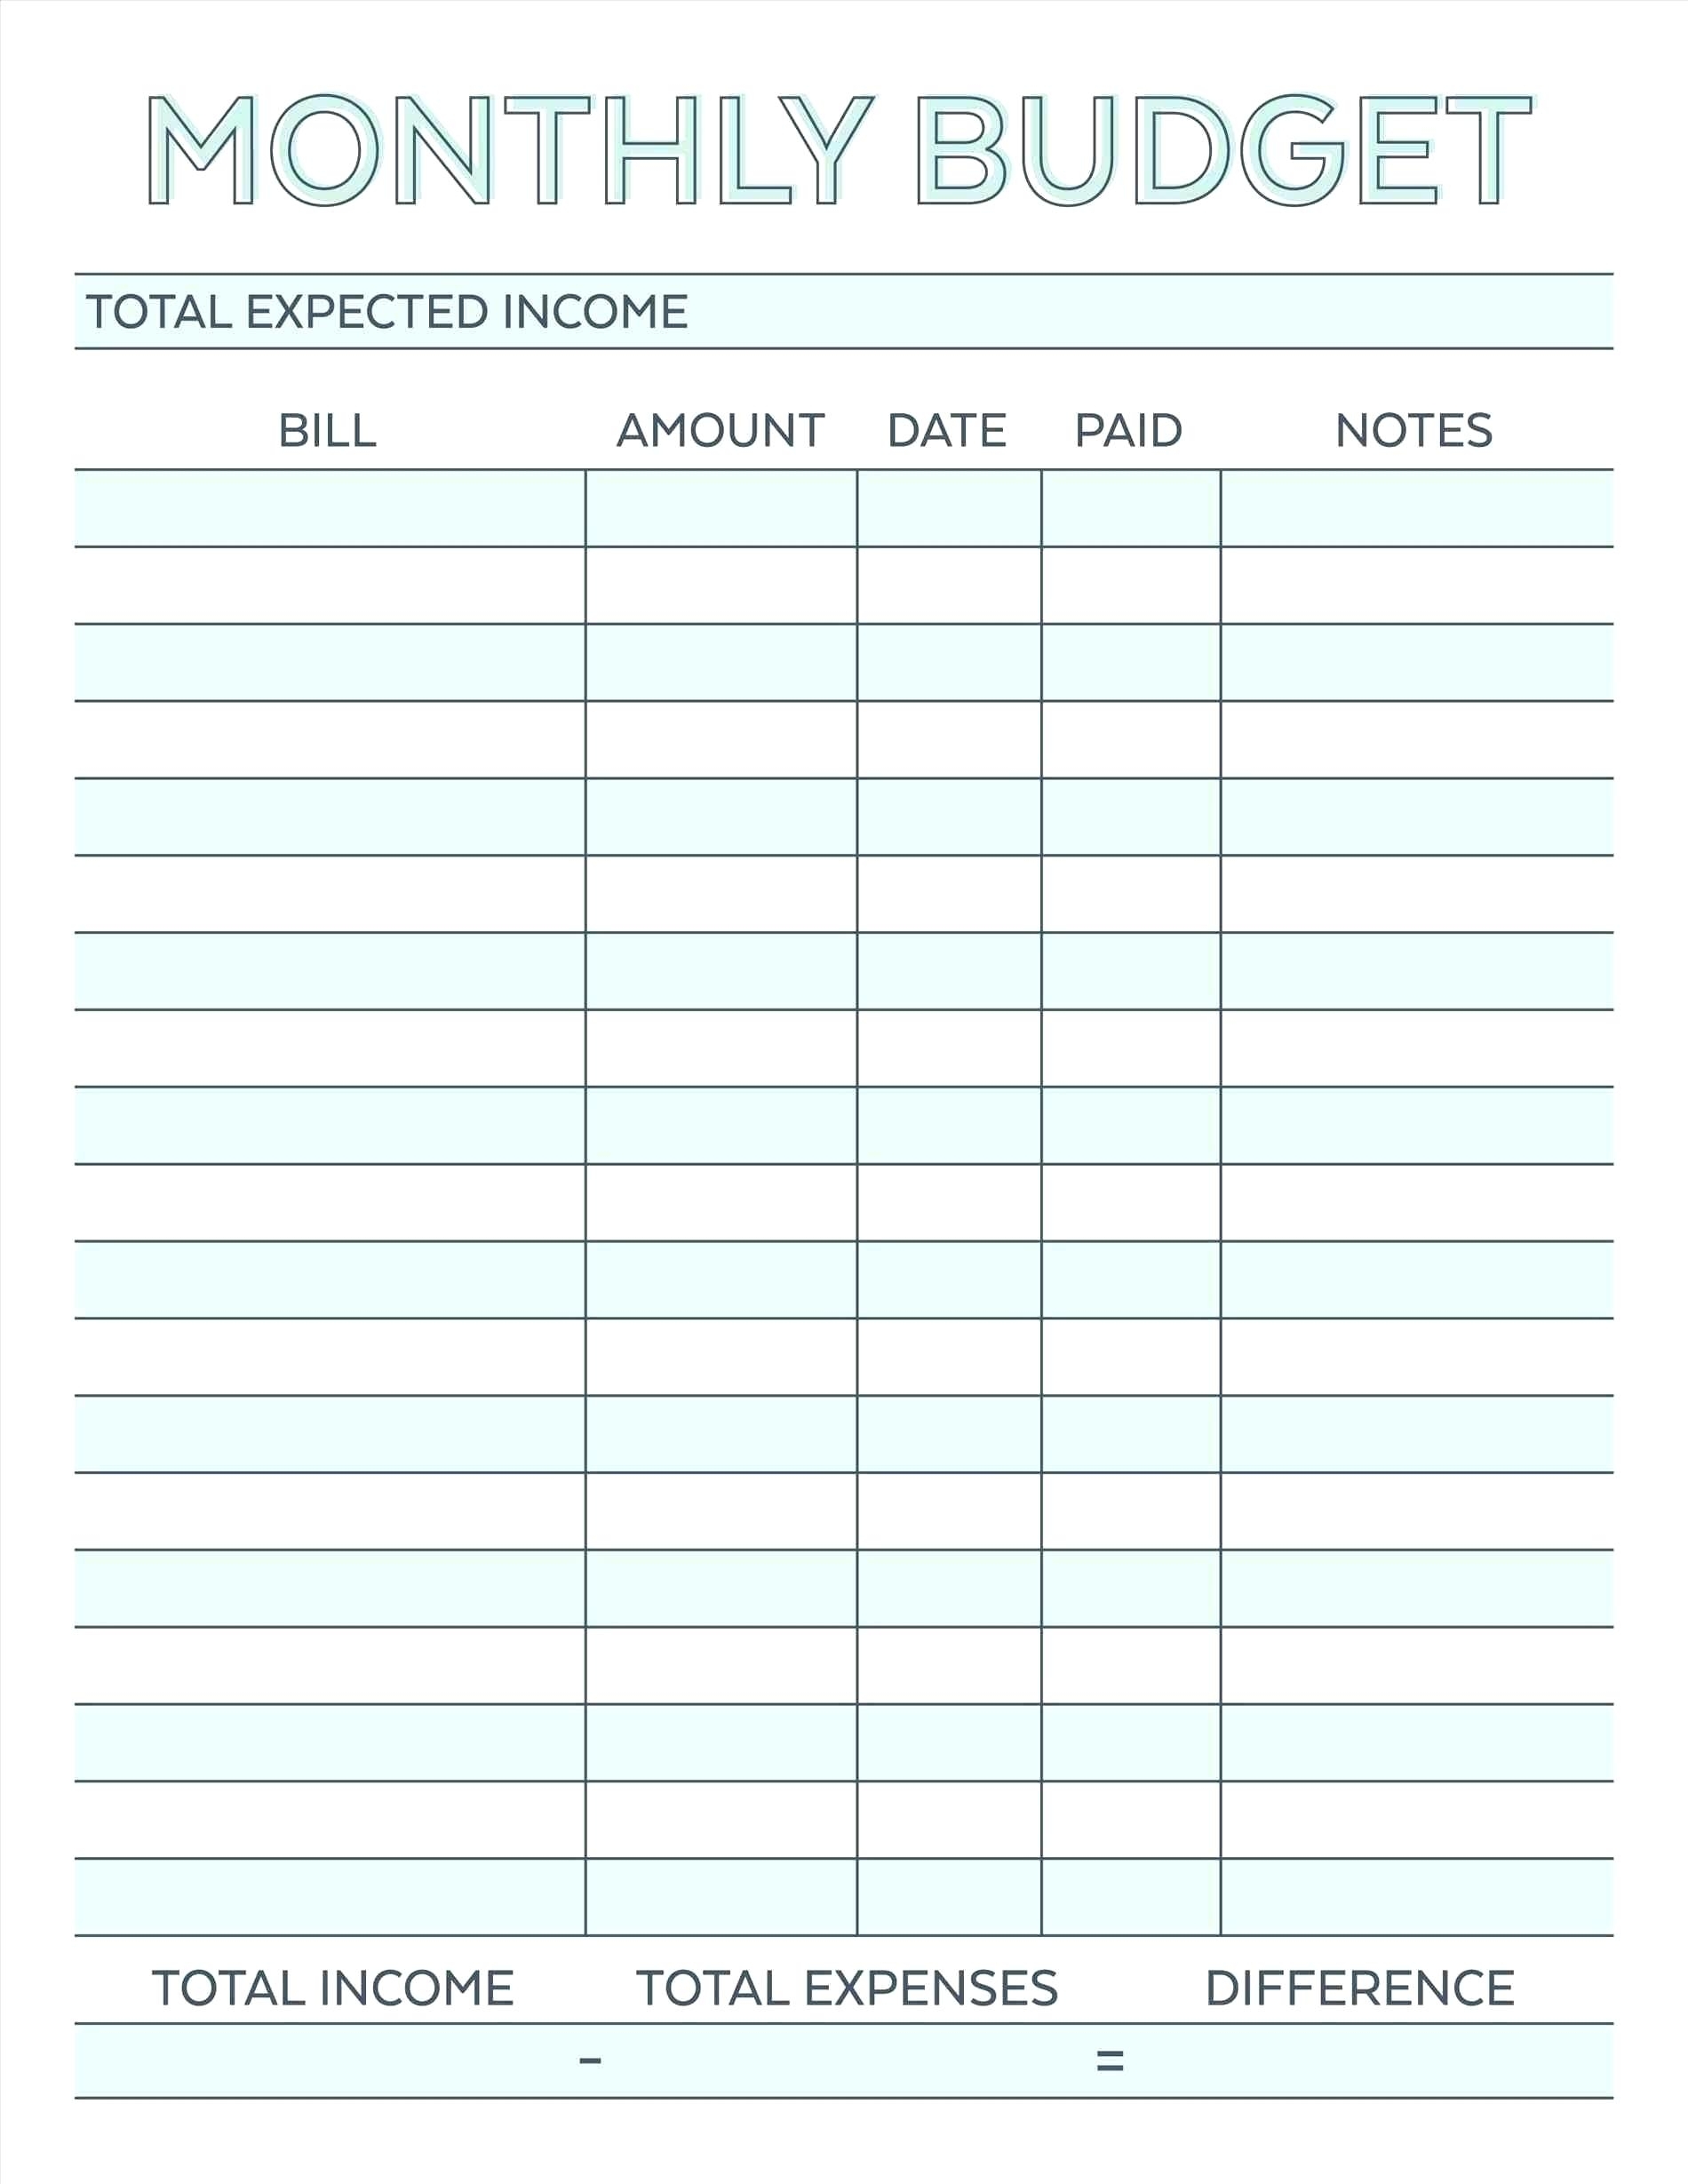 Collect Monthly Bill Payment Log